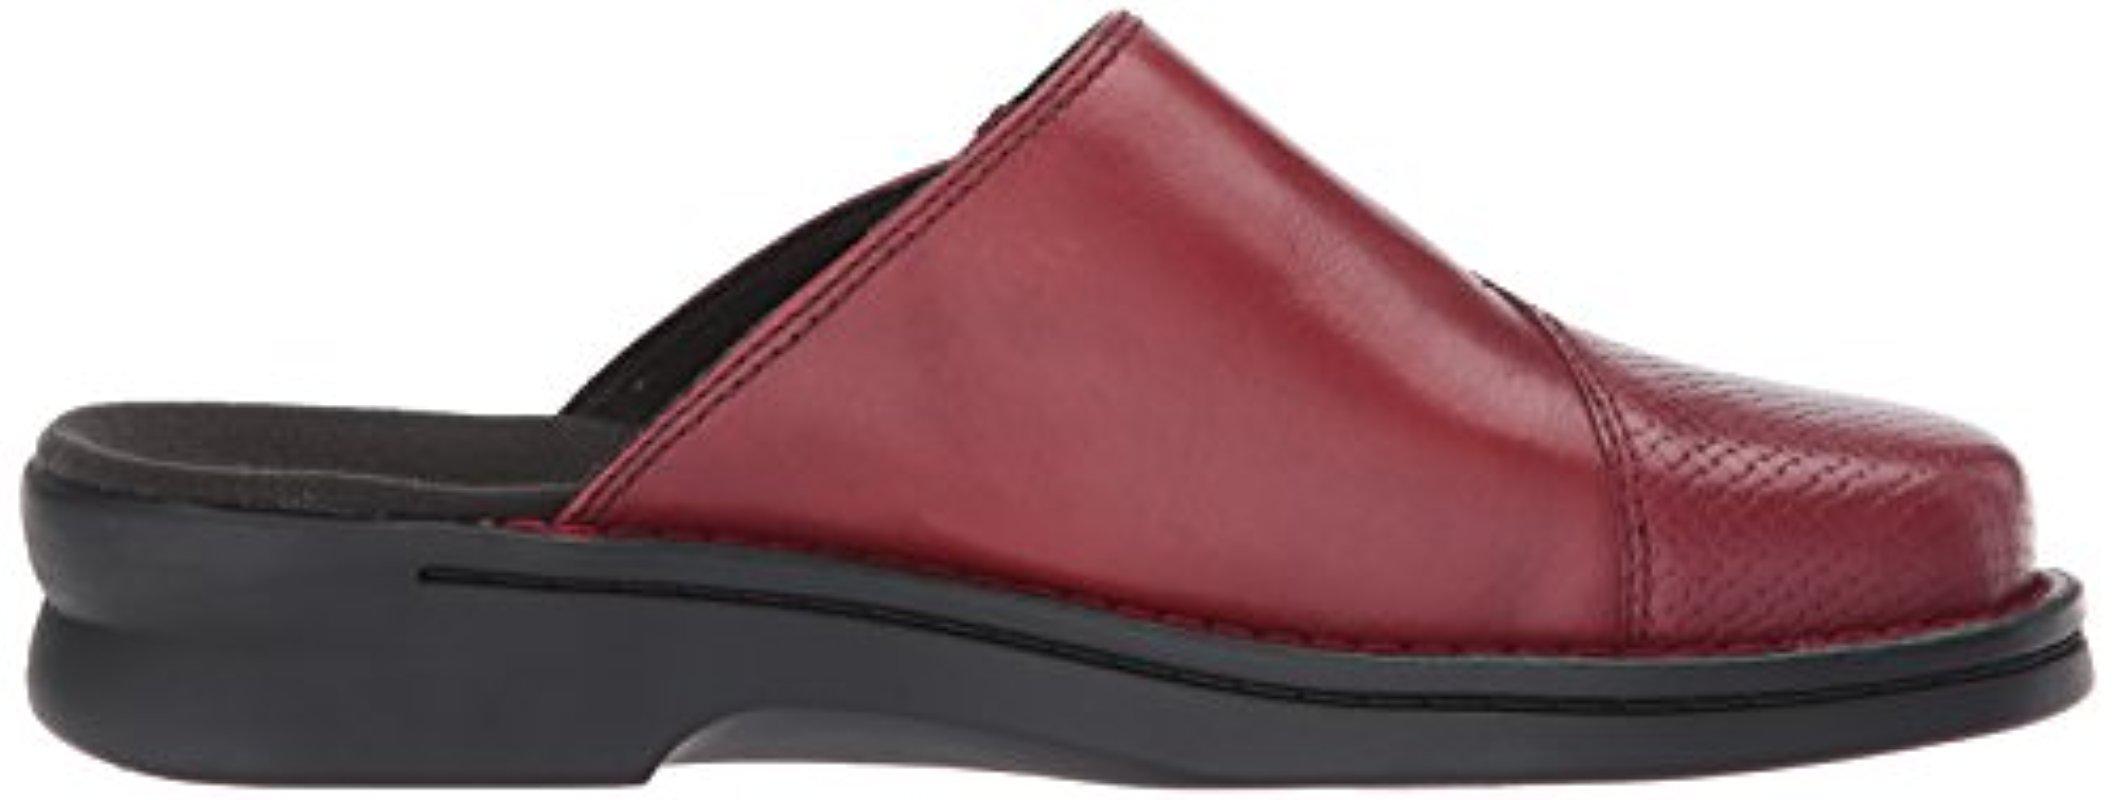 clarks patty nell mule